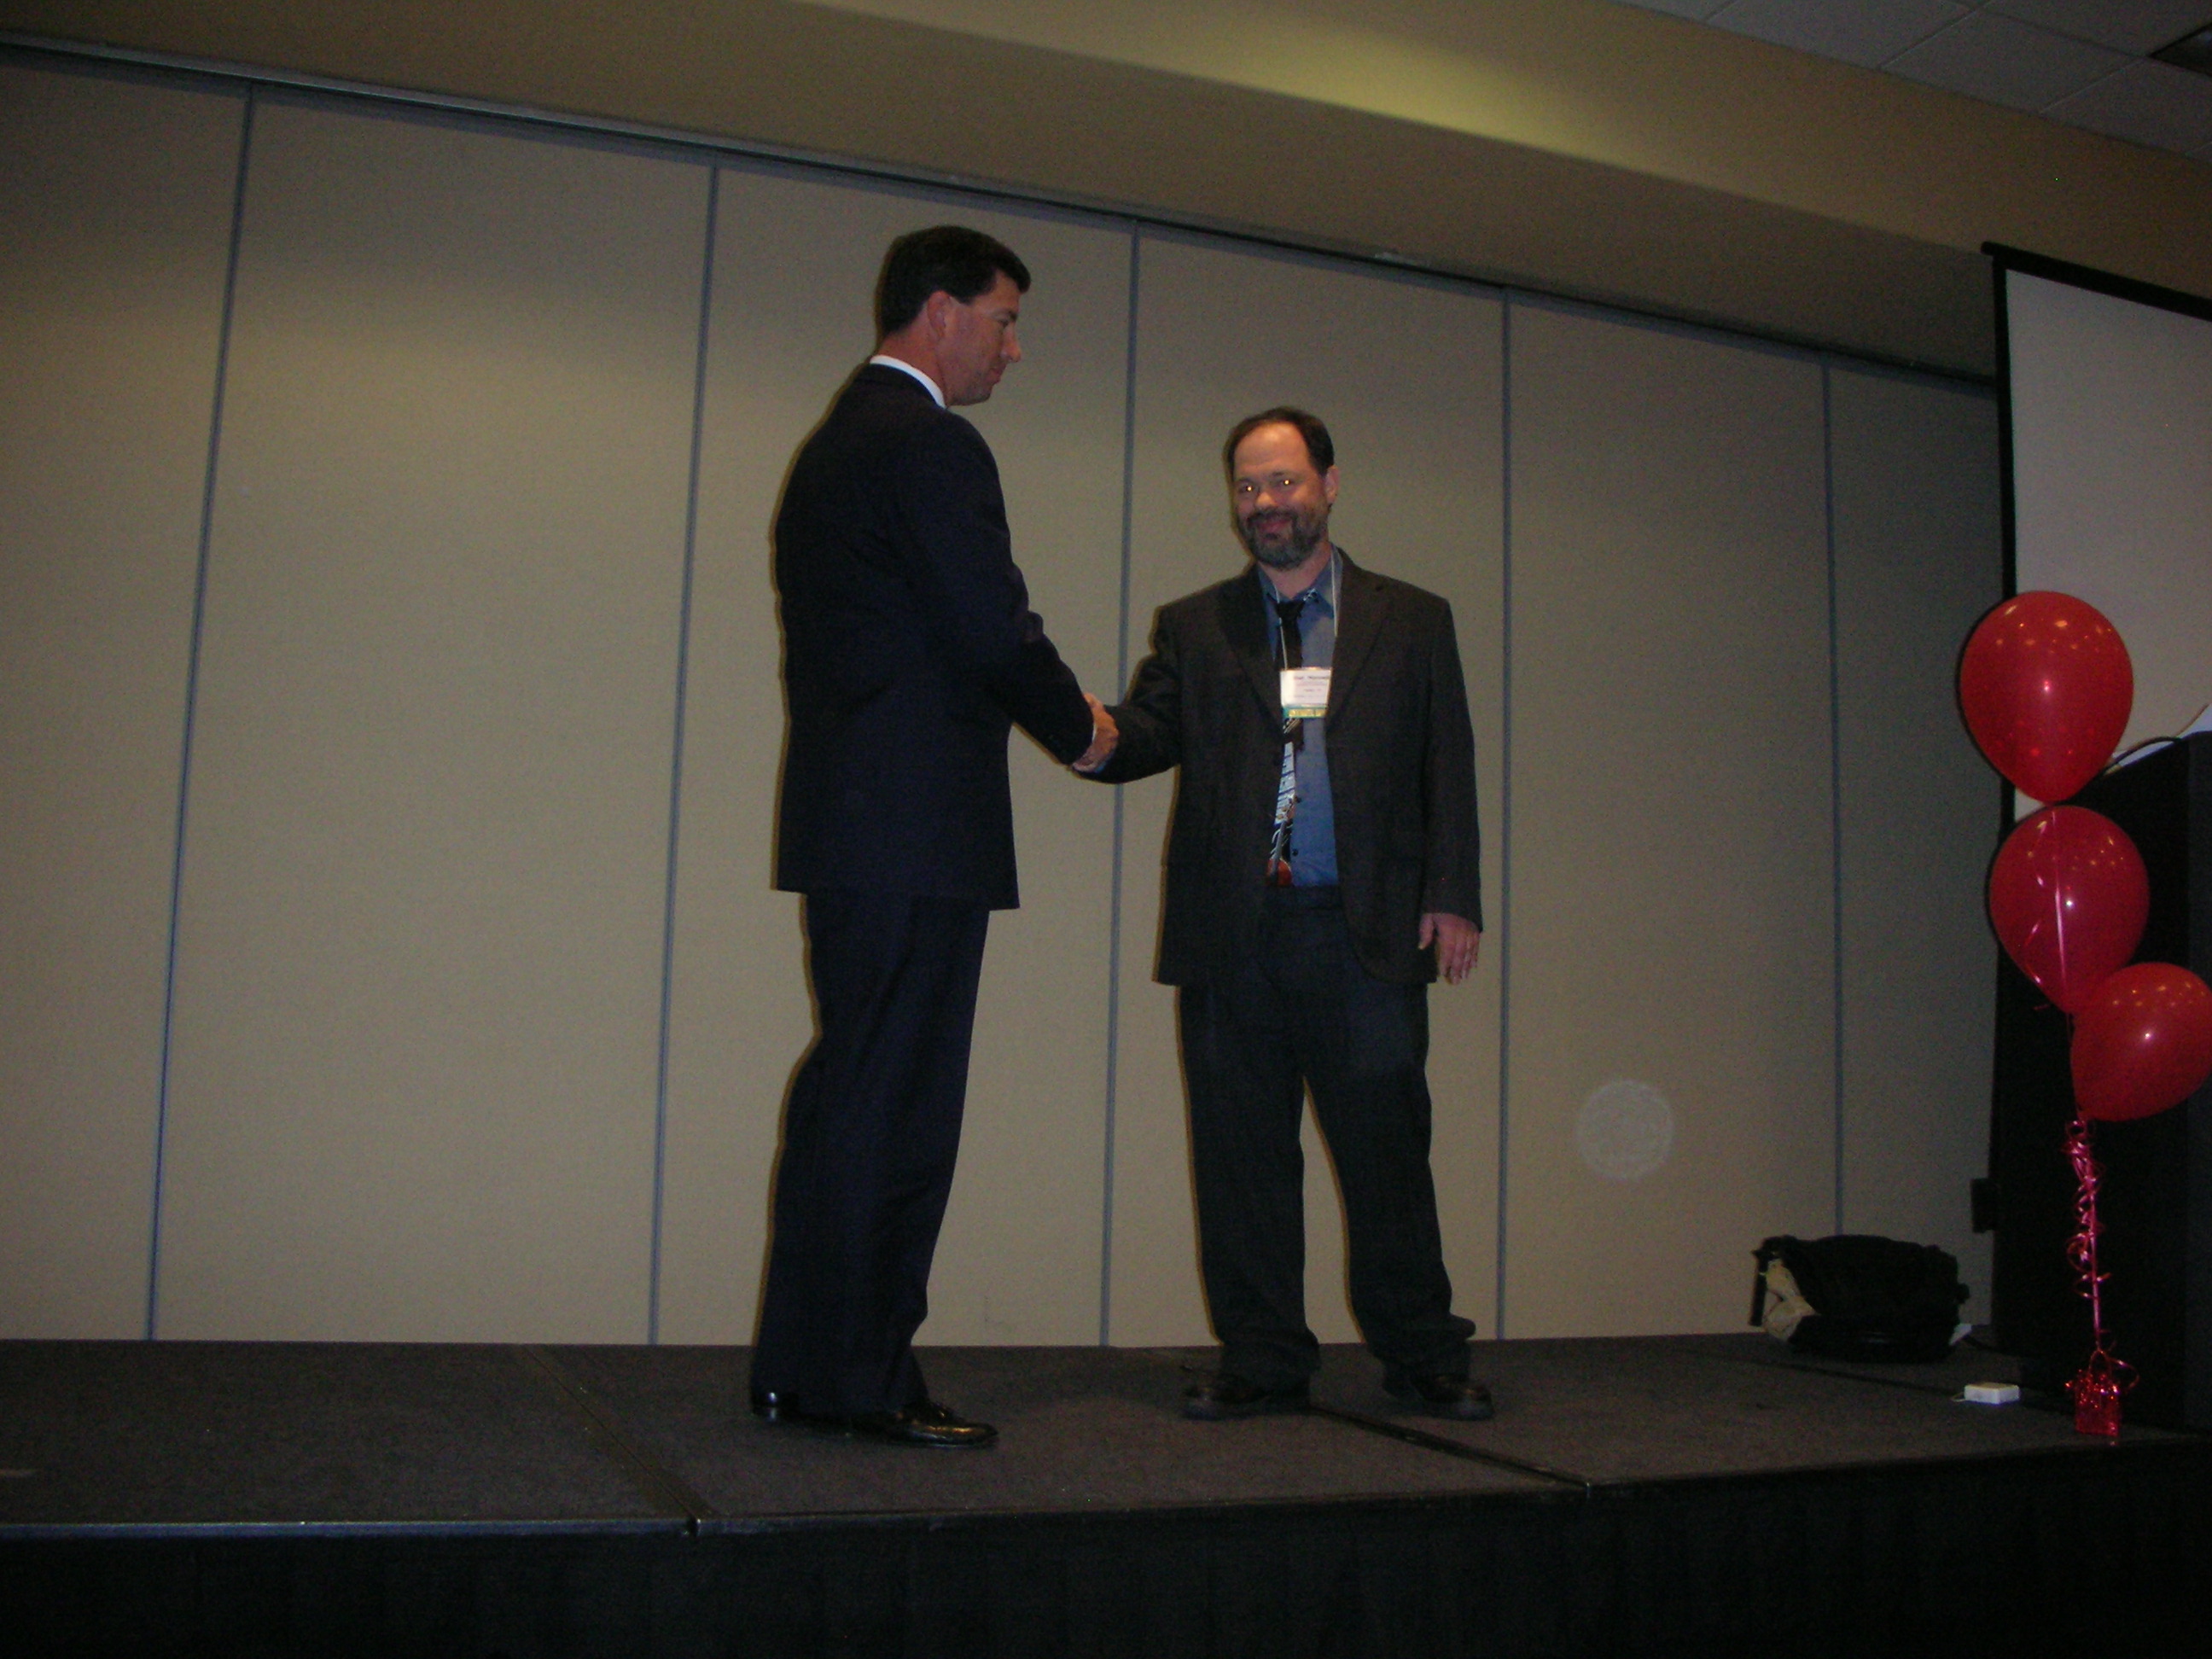 Jeff Armstrong (Left) greets Shel Horowitz at Noteworthy USA Convention